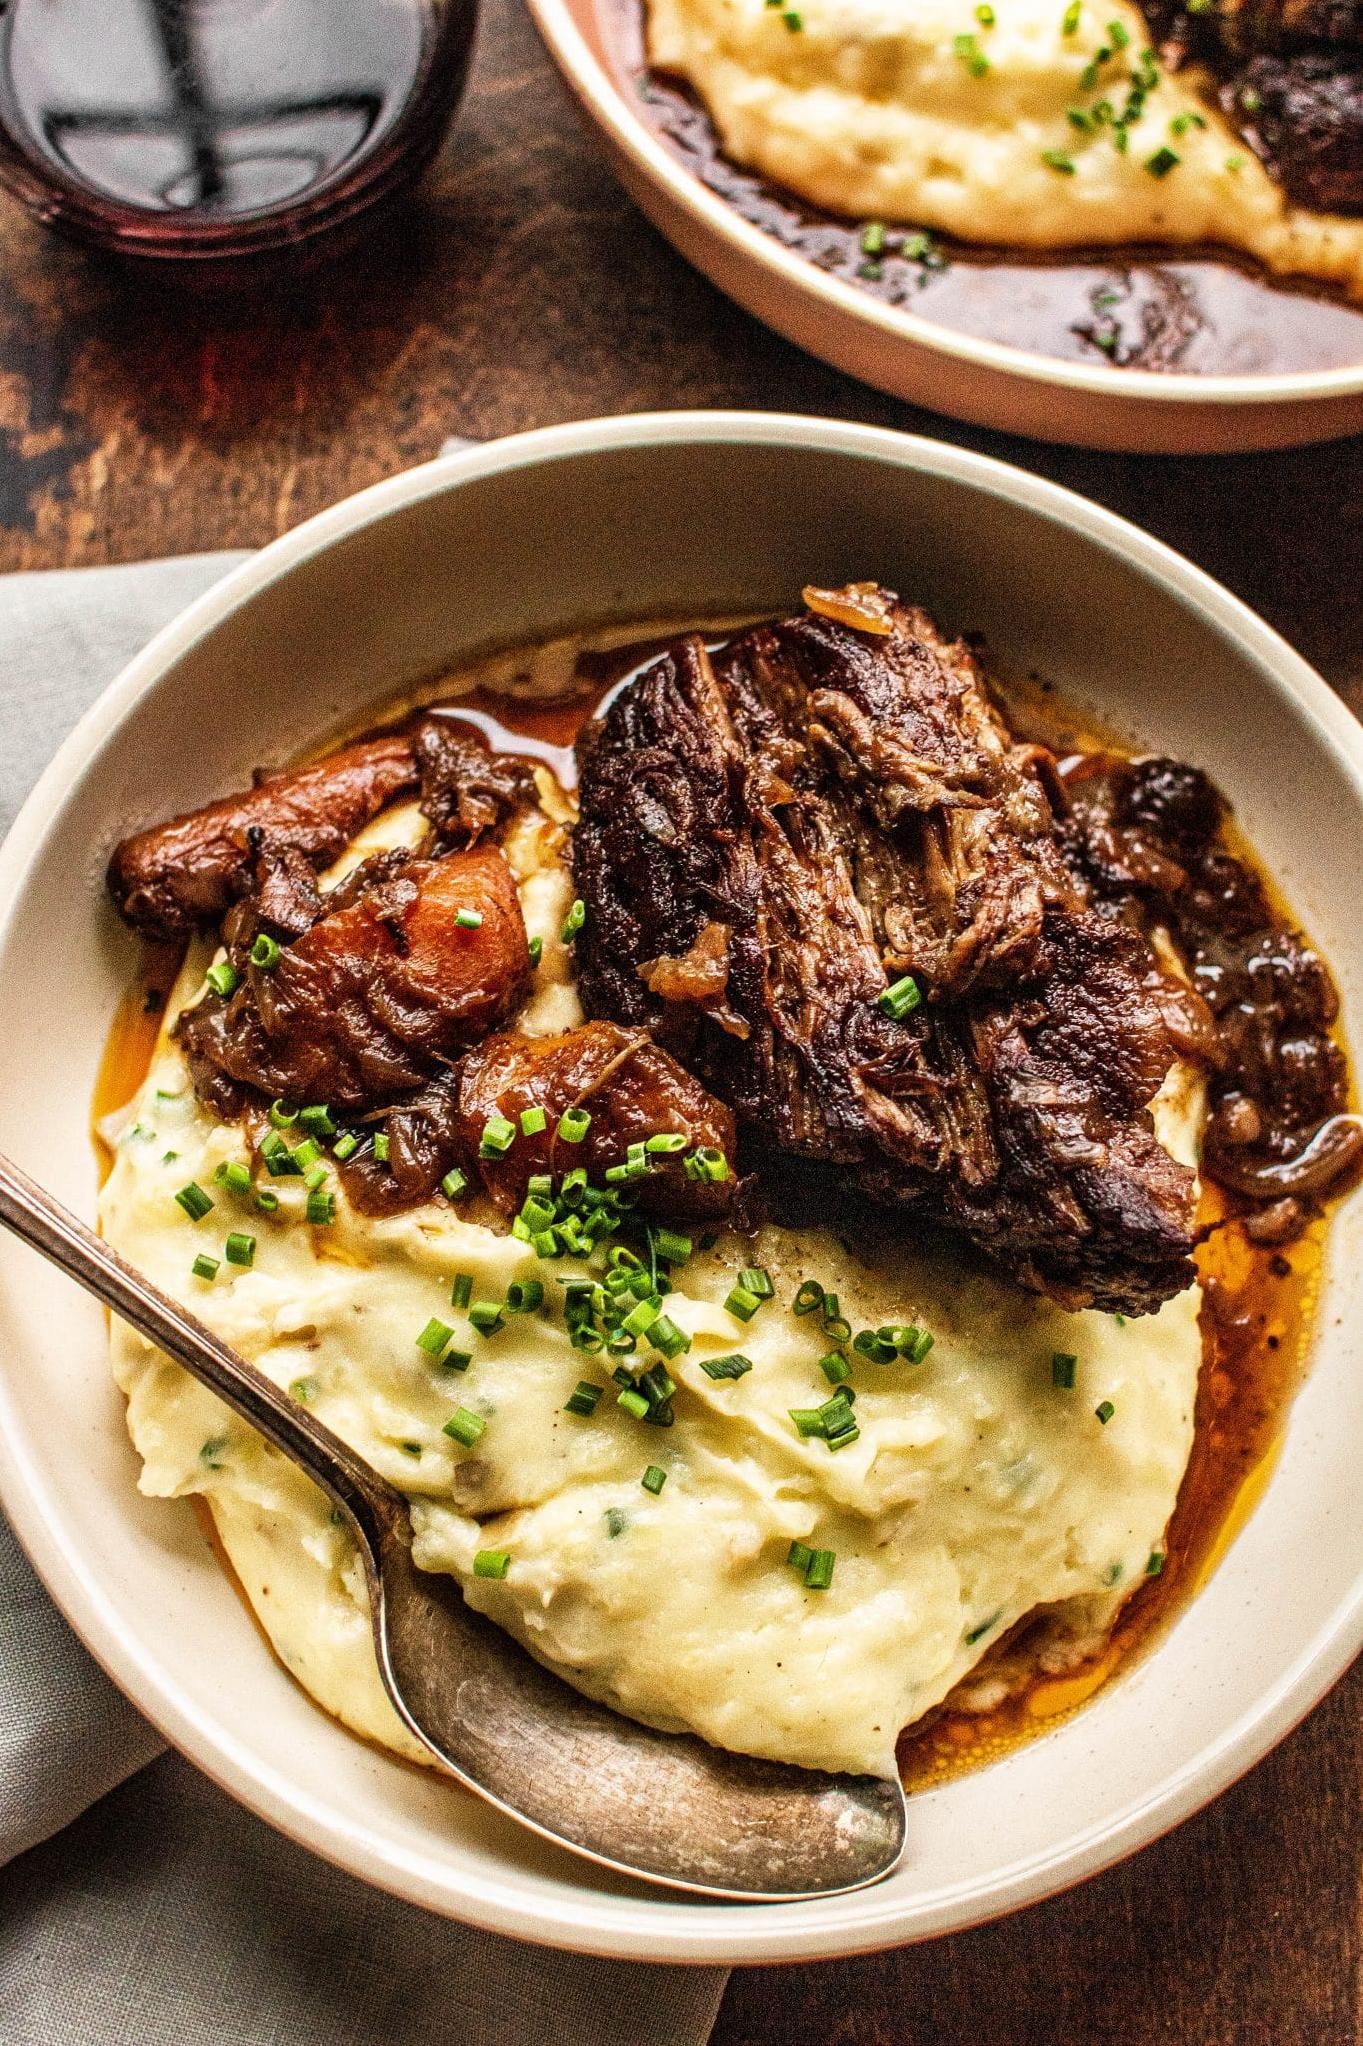  Savor the rich flavors of tender beef and red wine in every bite.